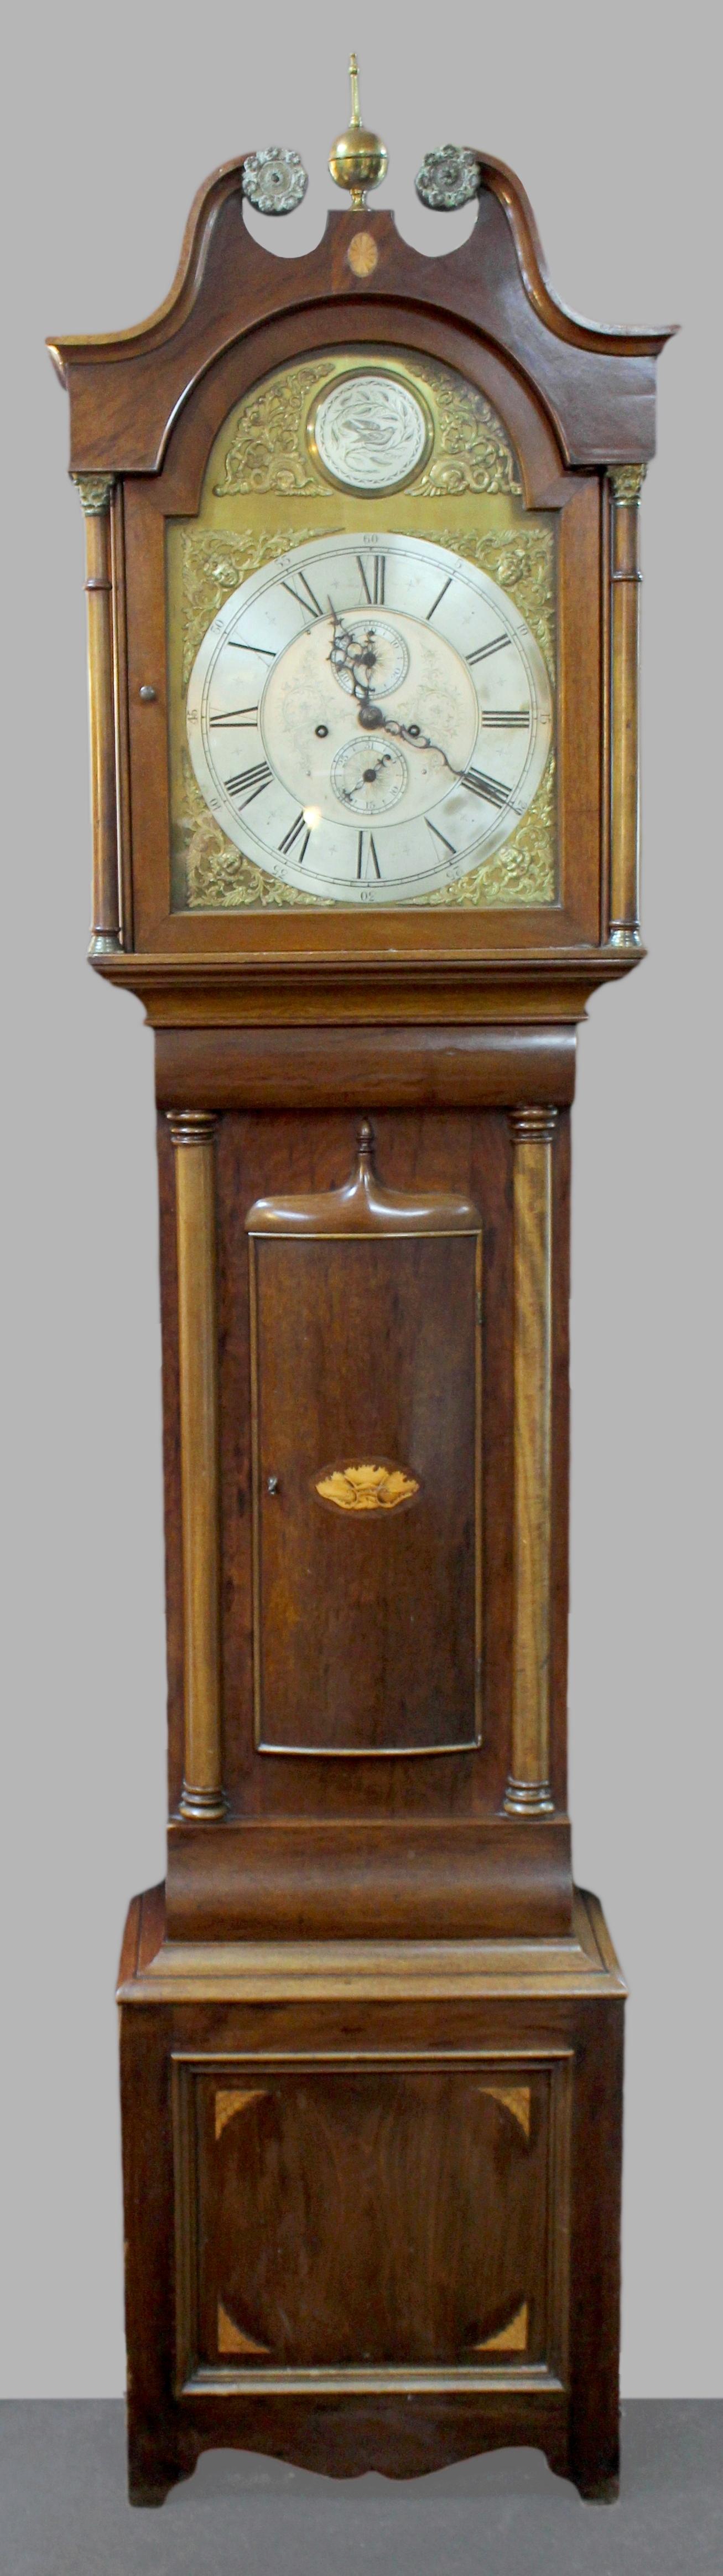 Early 19th c. English mahogany brass arched dial longcase clock


Period c.1840

Measures: Width 55 cm / 21 1/2 in

Depth 27 cm / 10 1/2 in

Height 227 cm / 89 1/2 in

Dial Brass arched dial with engraved silvered motif to the lunette.